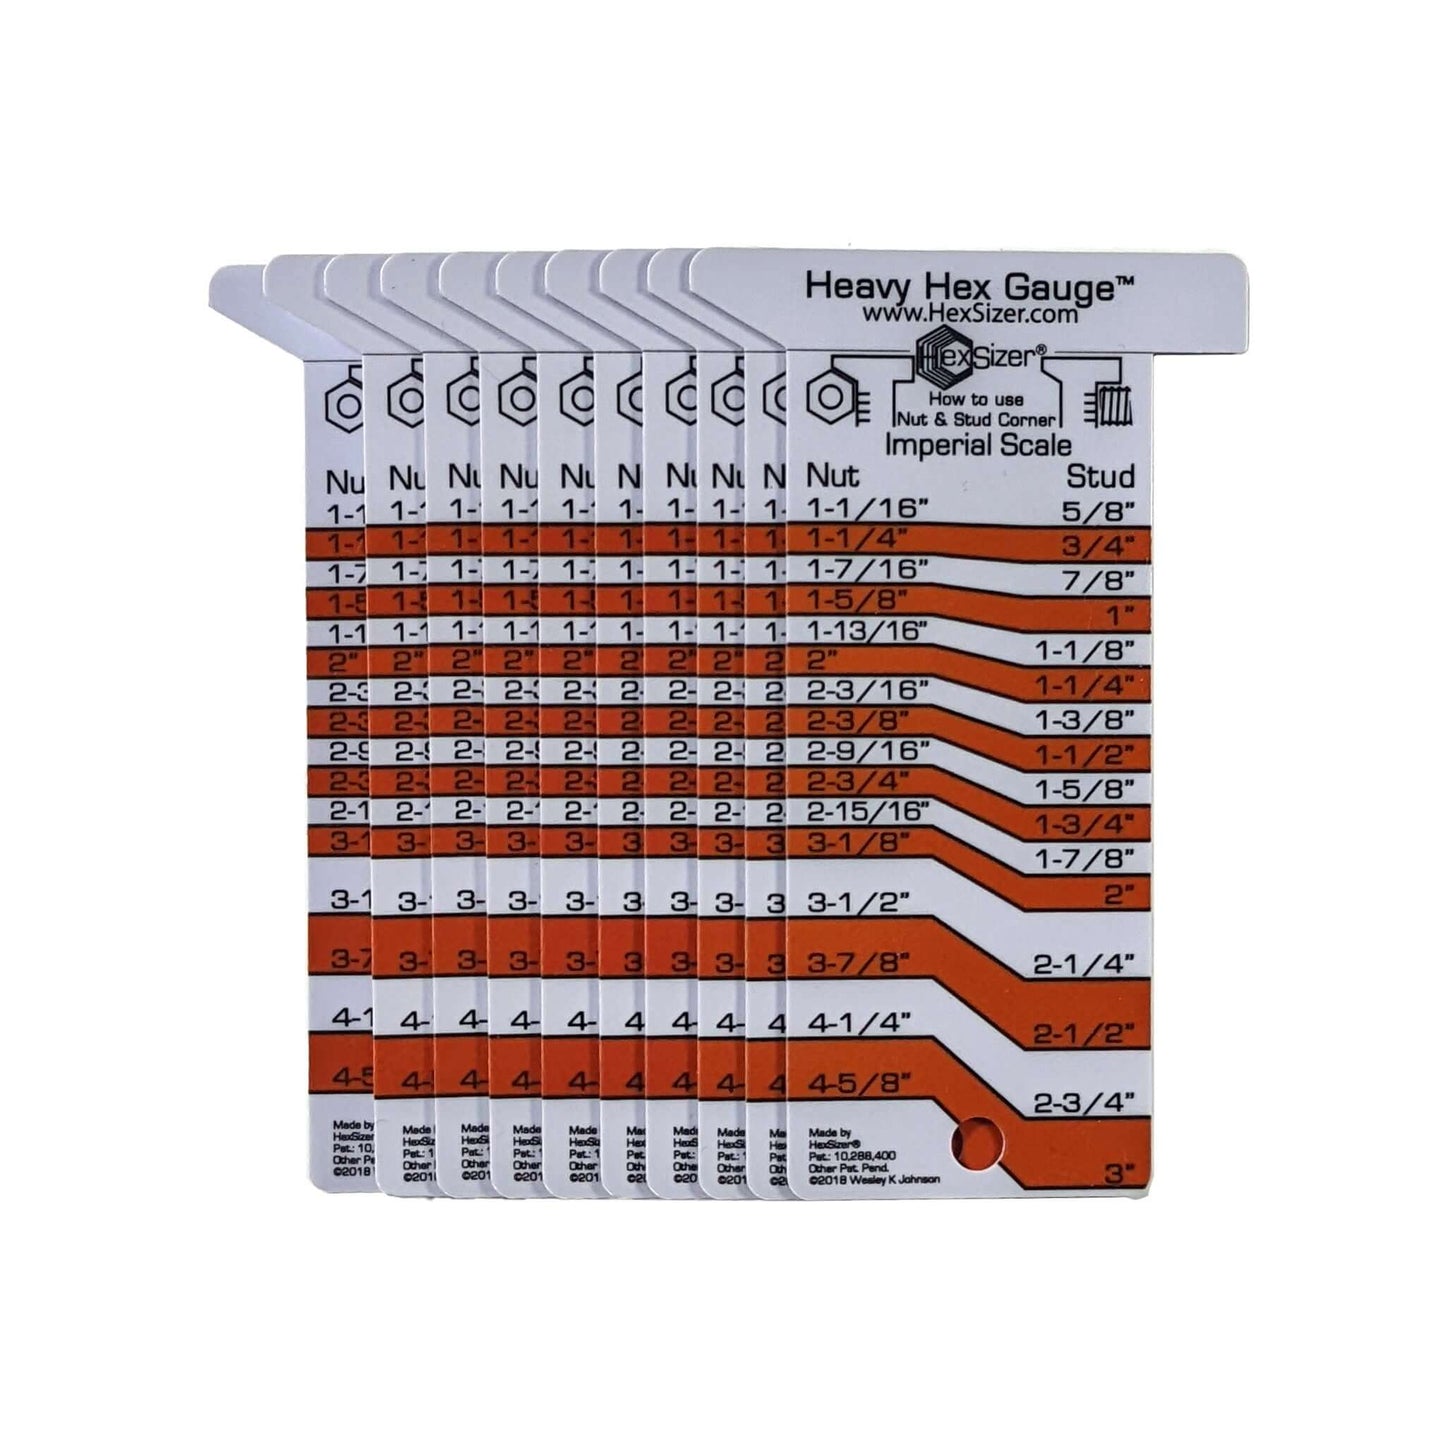 10 Pack without sleeves - Orange on White - Plastic Heavy Hex Gauge - Inch Only